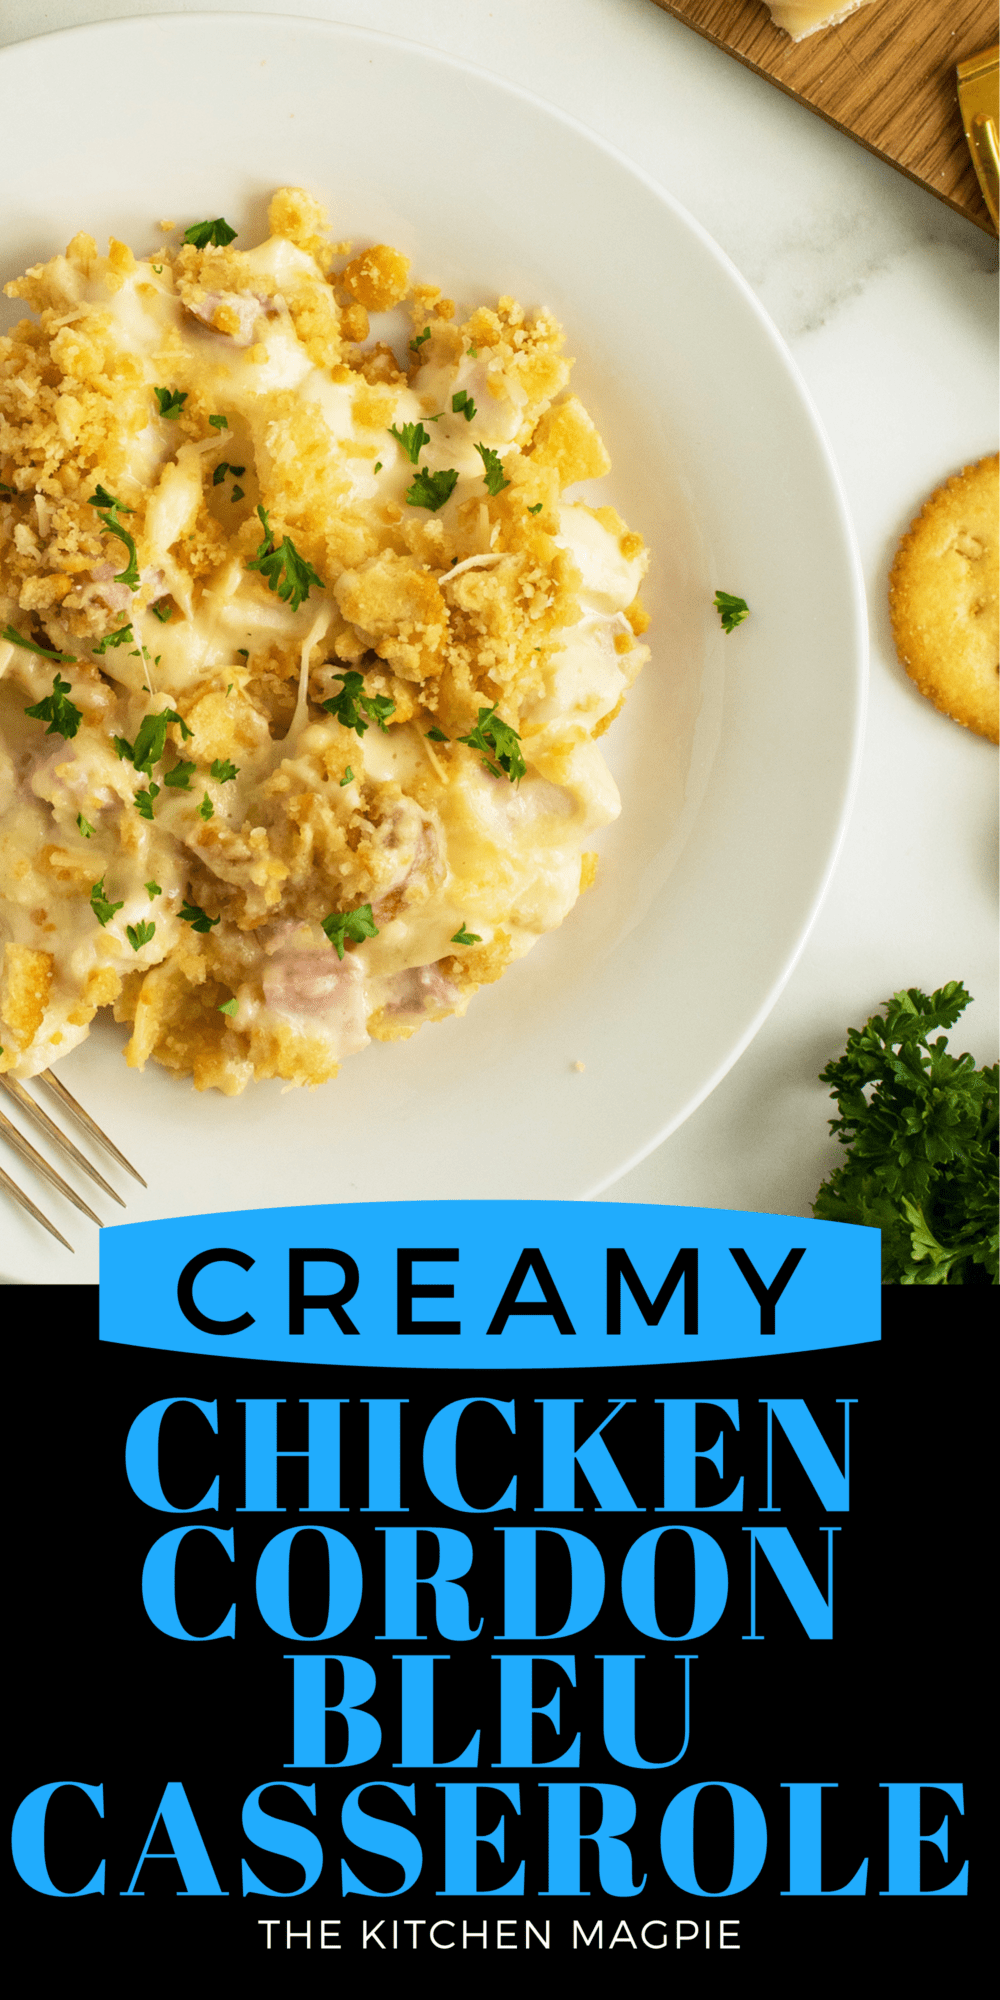  This casserole recipe takes all of the flavors of a great chicken cordon bleu and makes them into a crunchy, tender, and cheesy casserole for the whole family to enjoy!